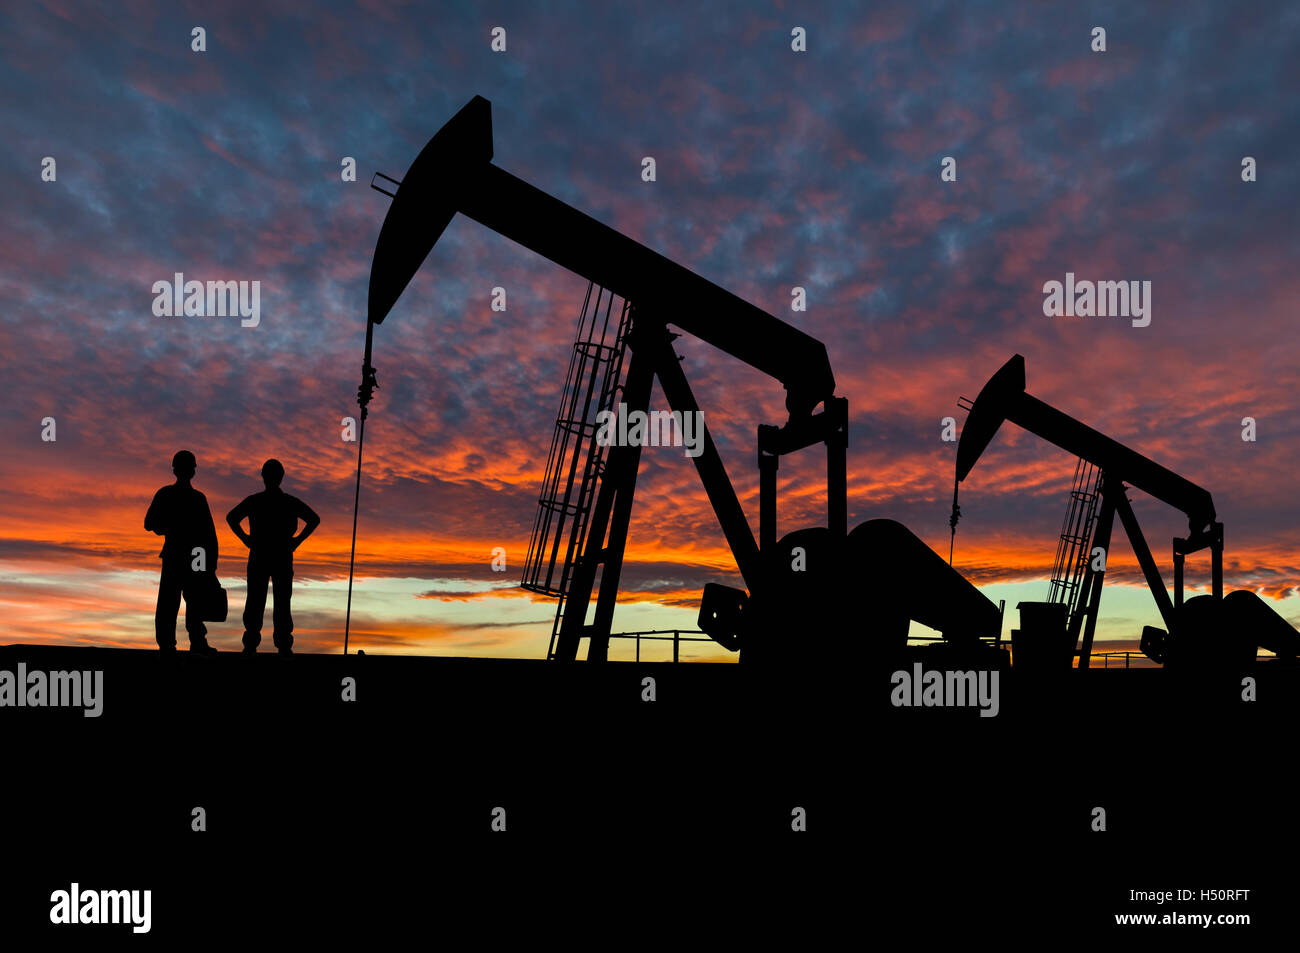 Silhouette of oil workers at an oil field pumpjack site against a dramatic sky. Stock Photo